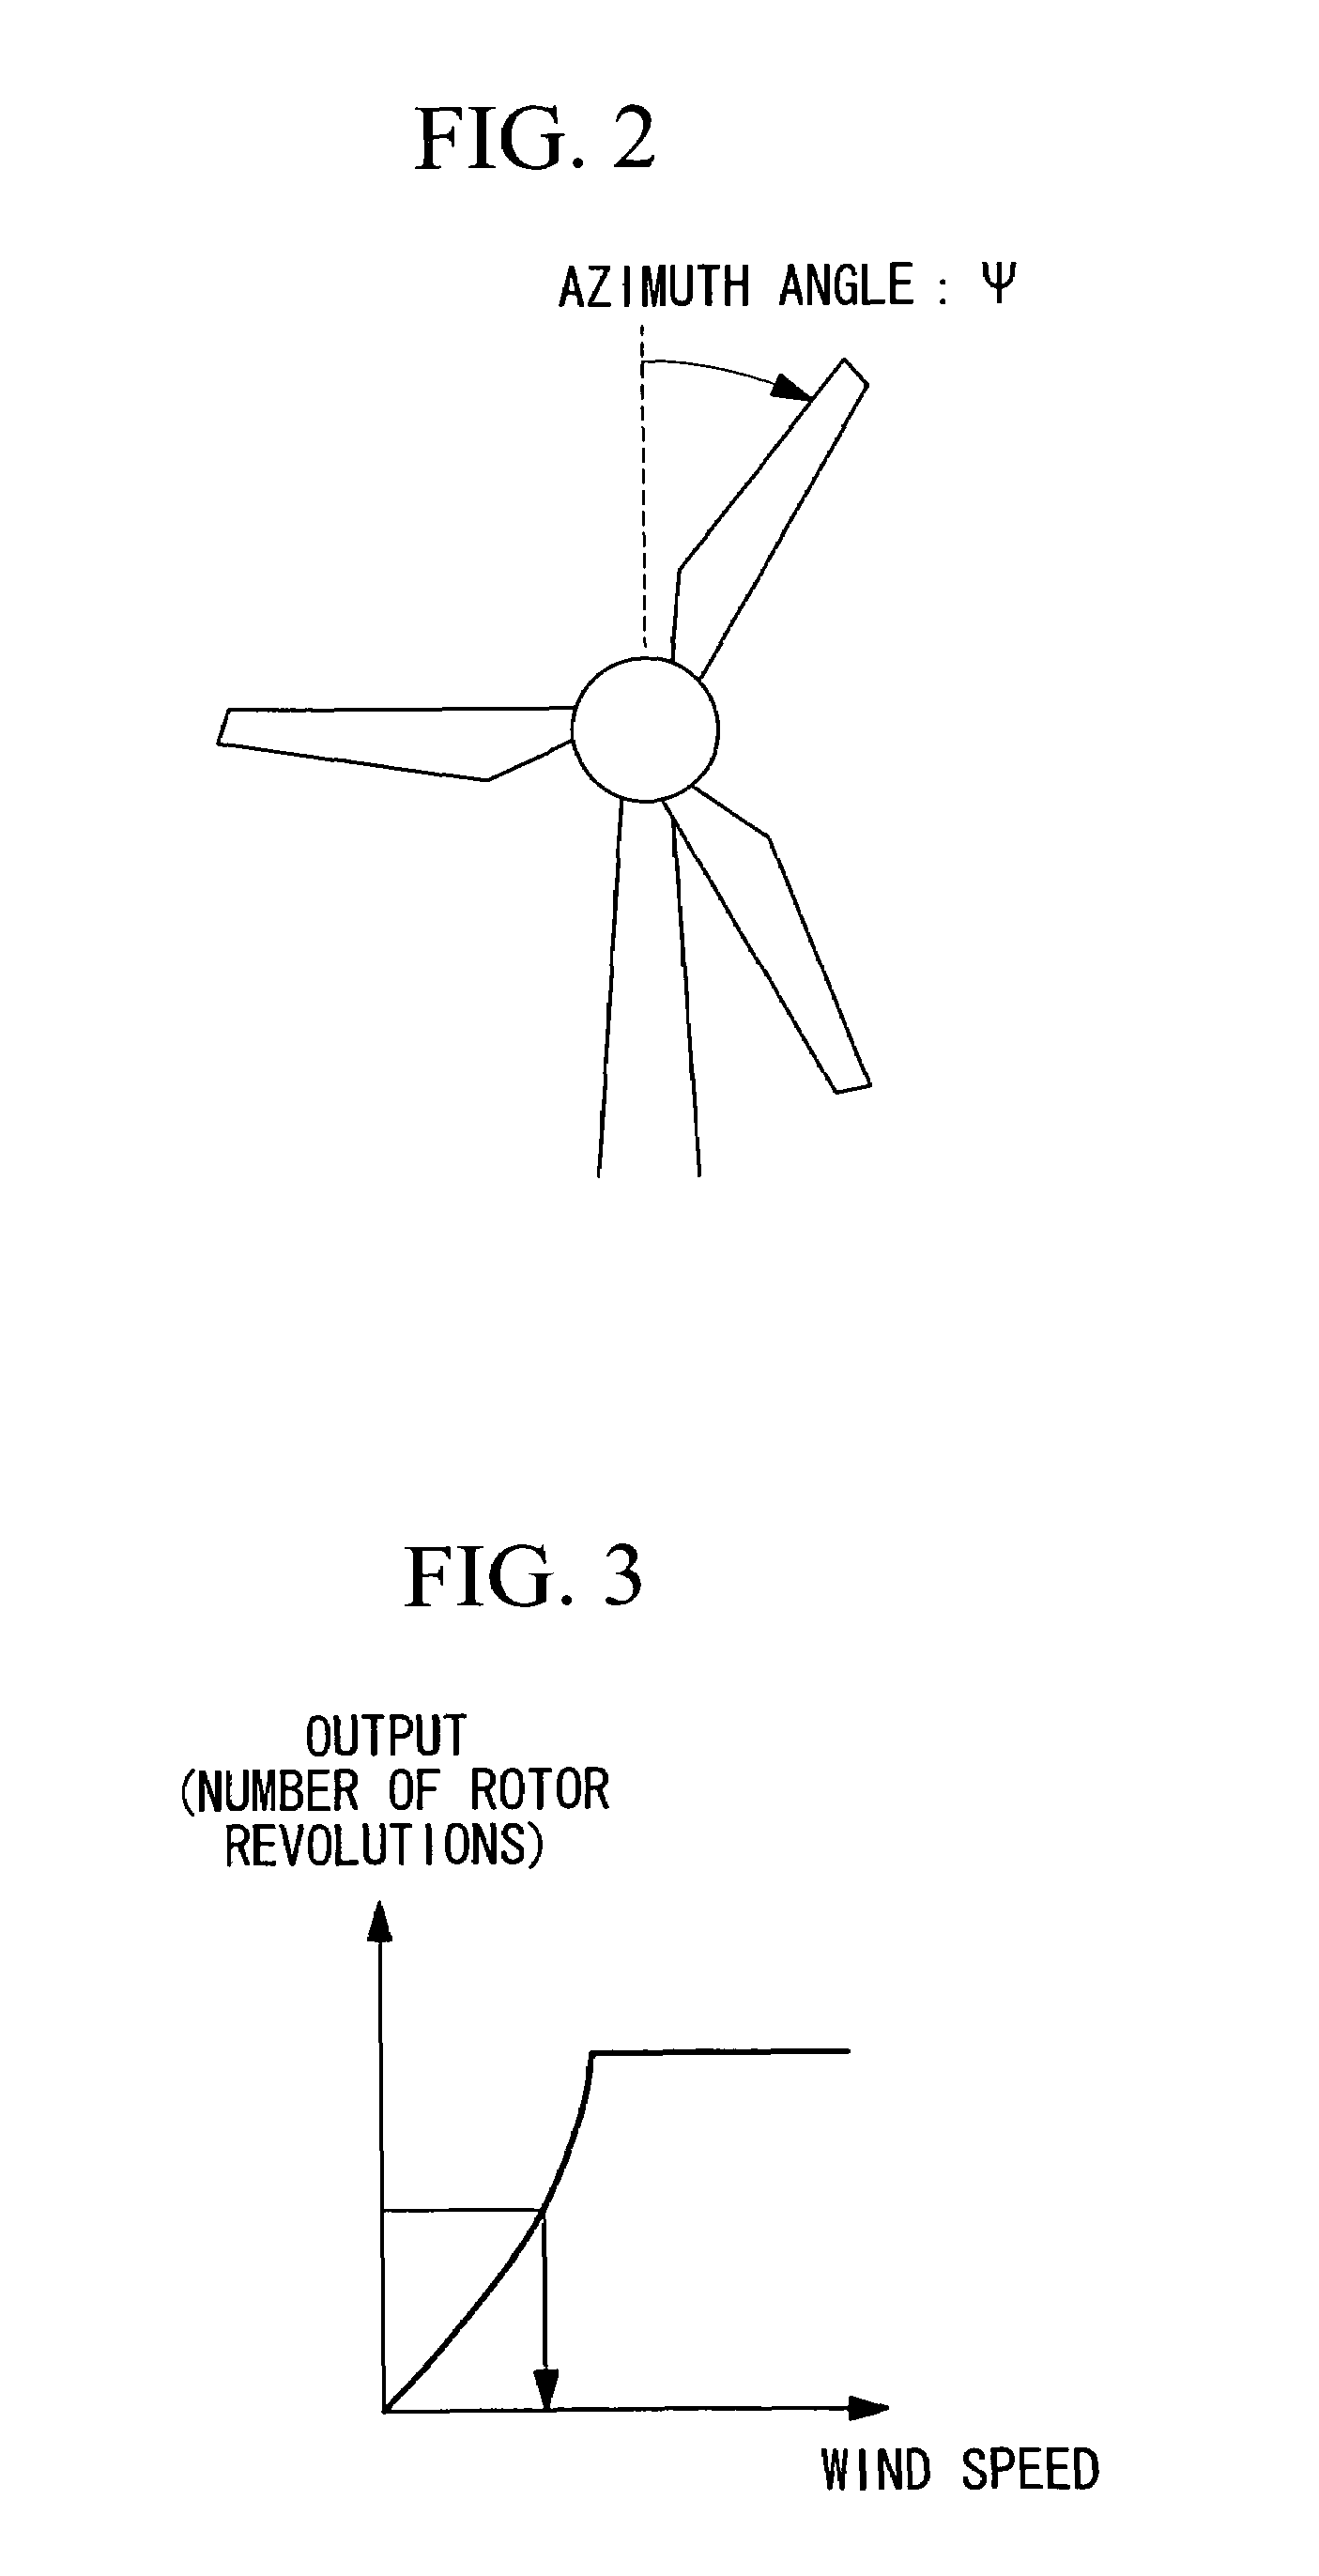 Blade-pitch-angle control device and wind power generator